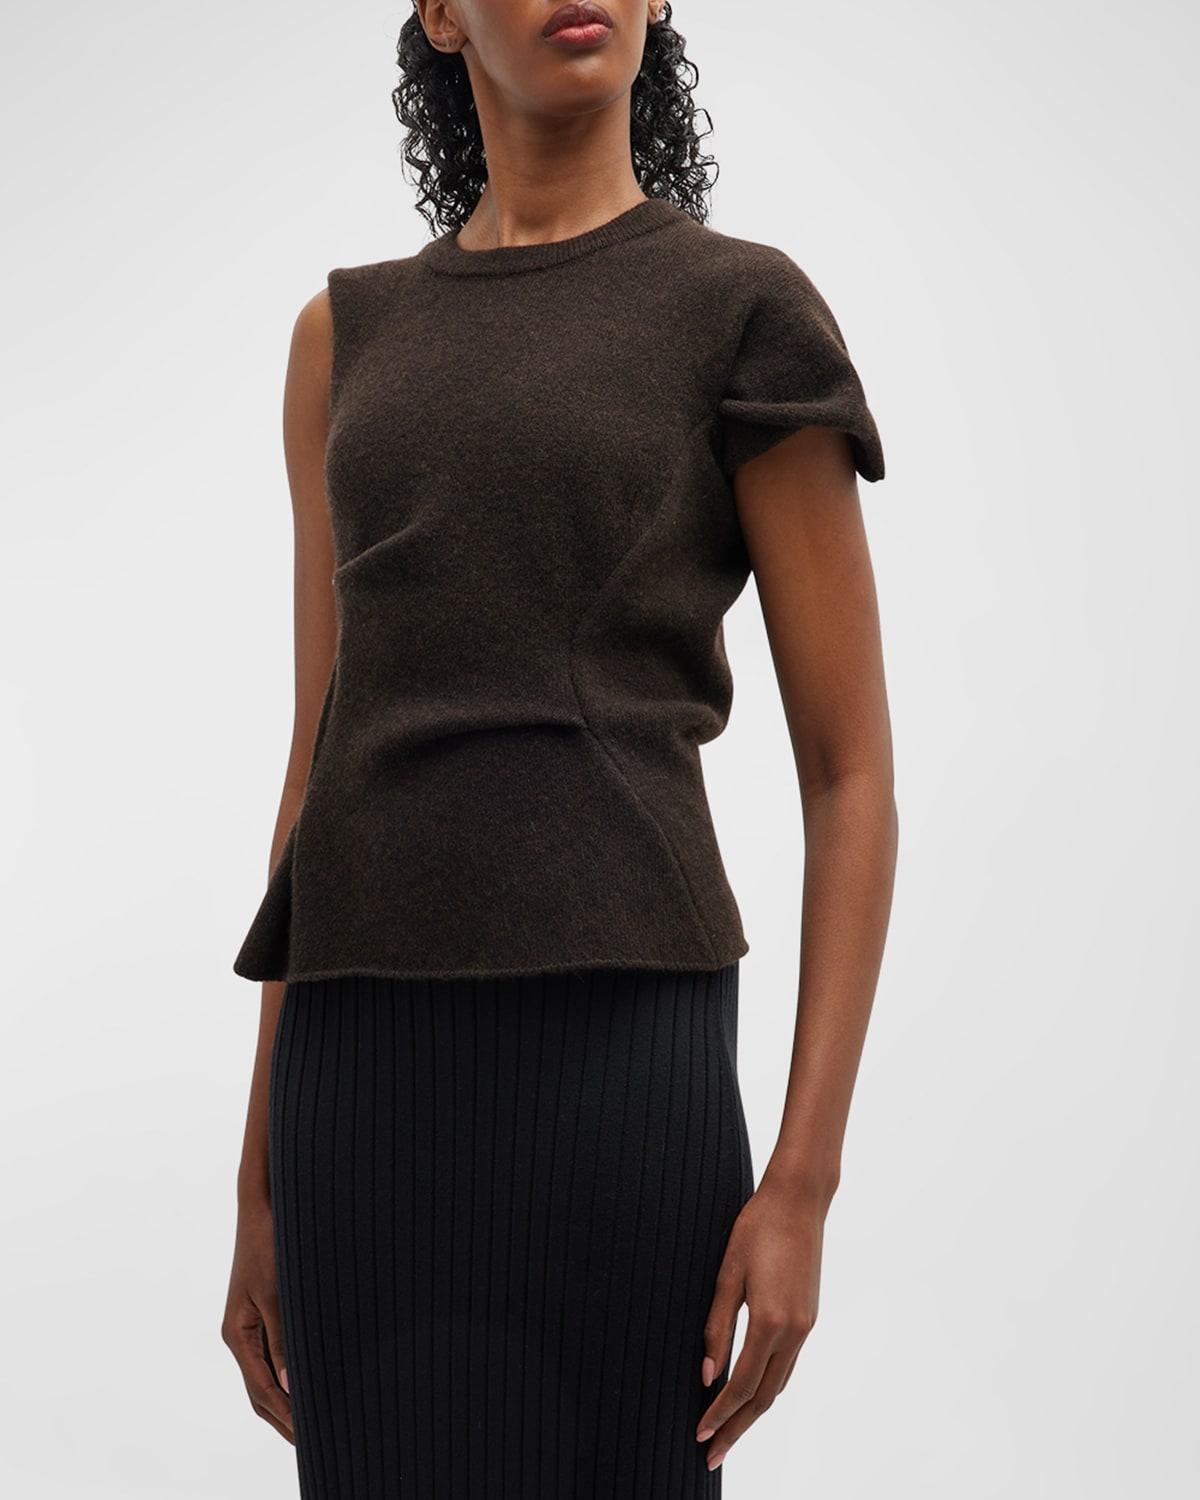 THE ROW CHARLISE CASHMERE ASYMMETRIC TOP